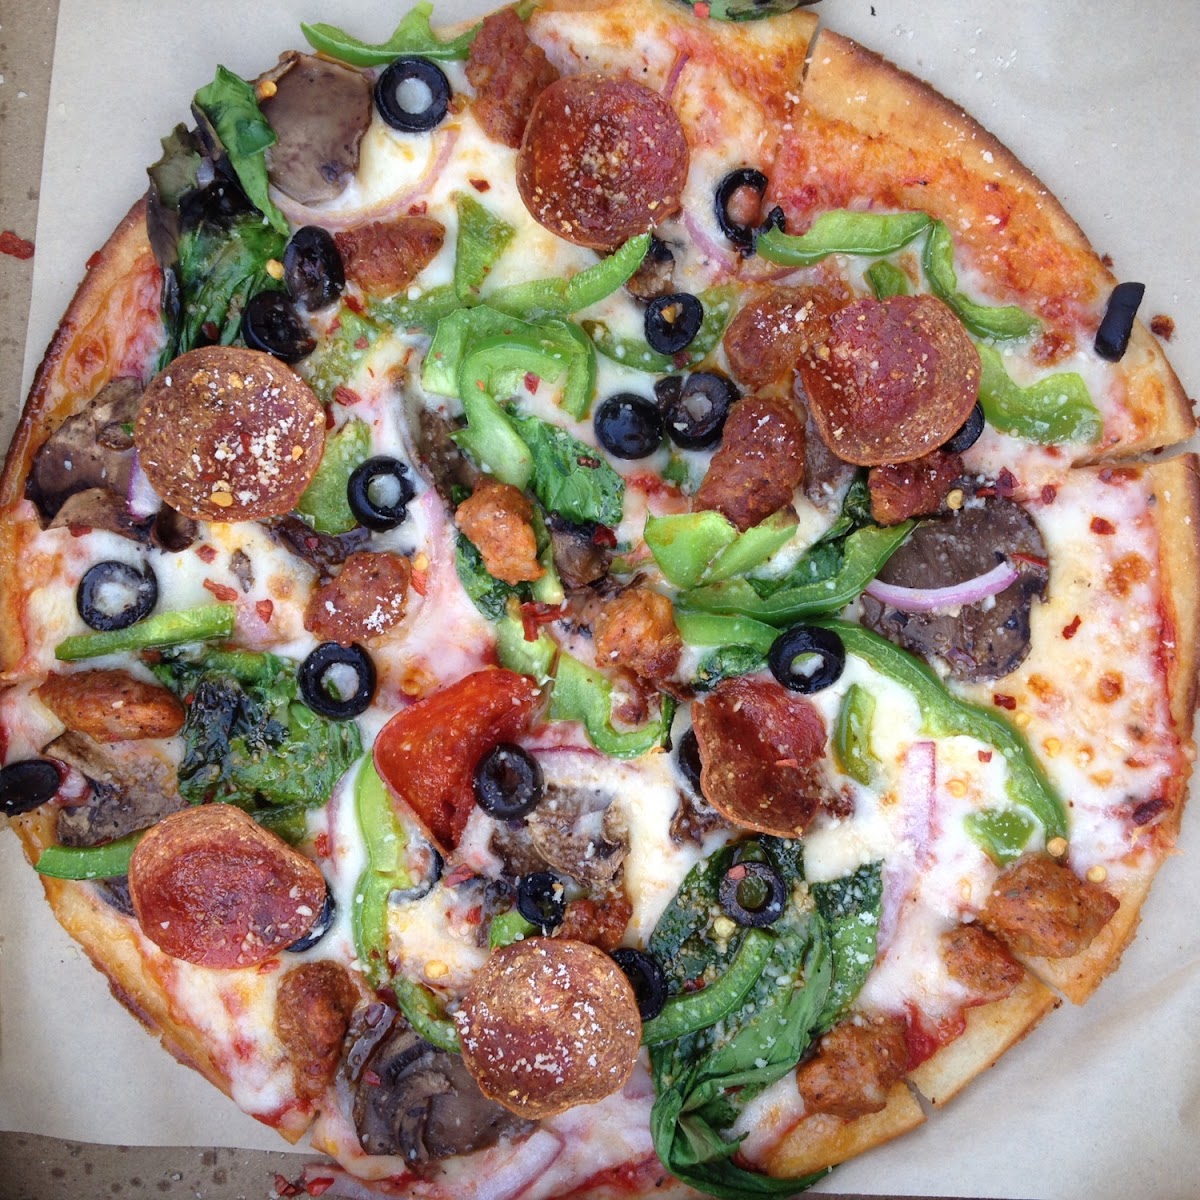 The glutenfree lineage(pepperoni, sausage, olives, peppers, mushrooms) plus garlic and spinach